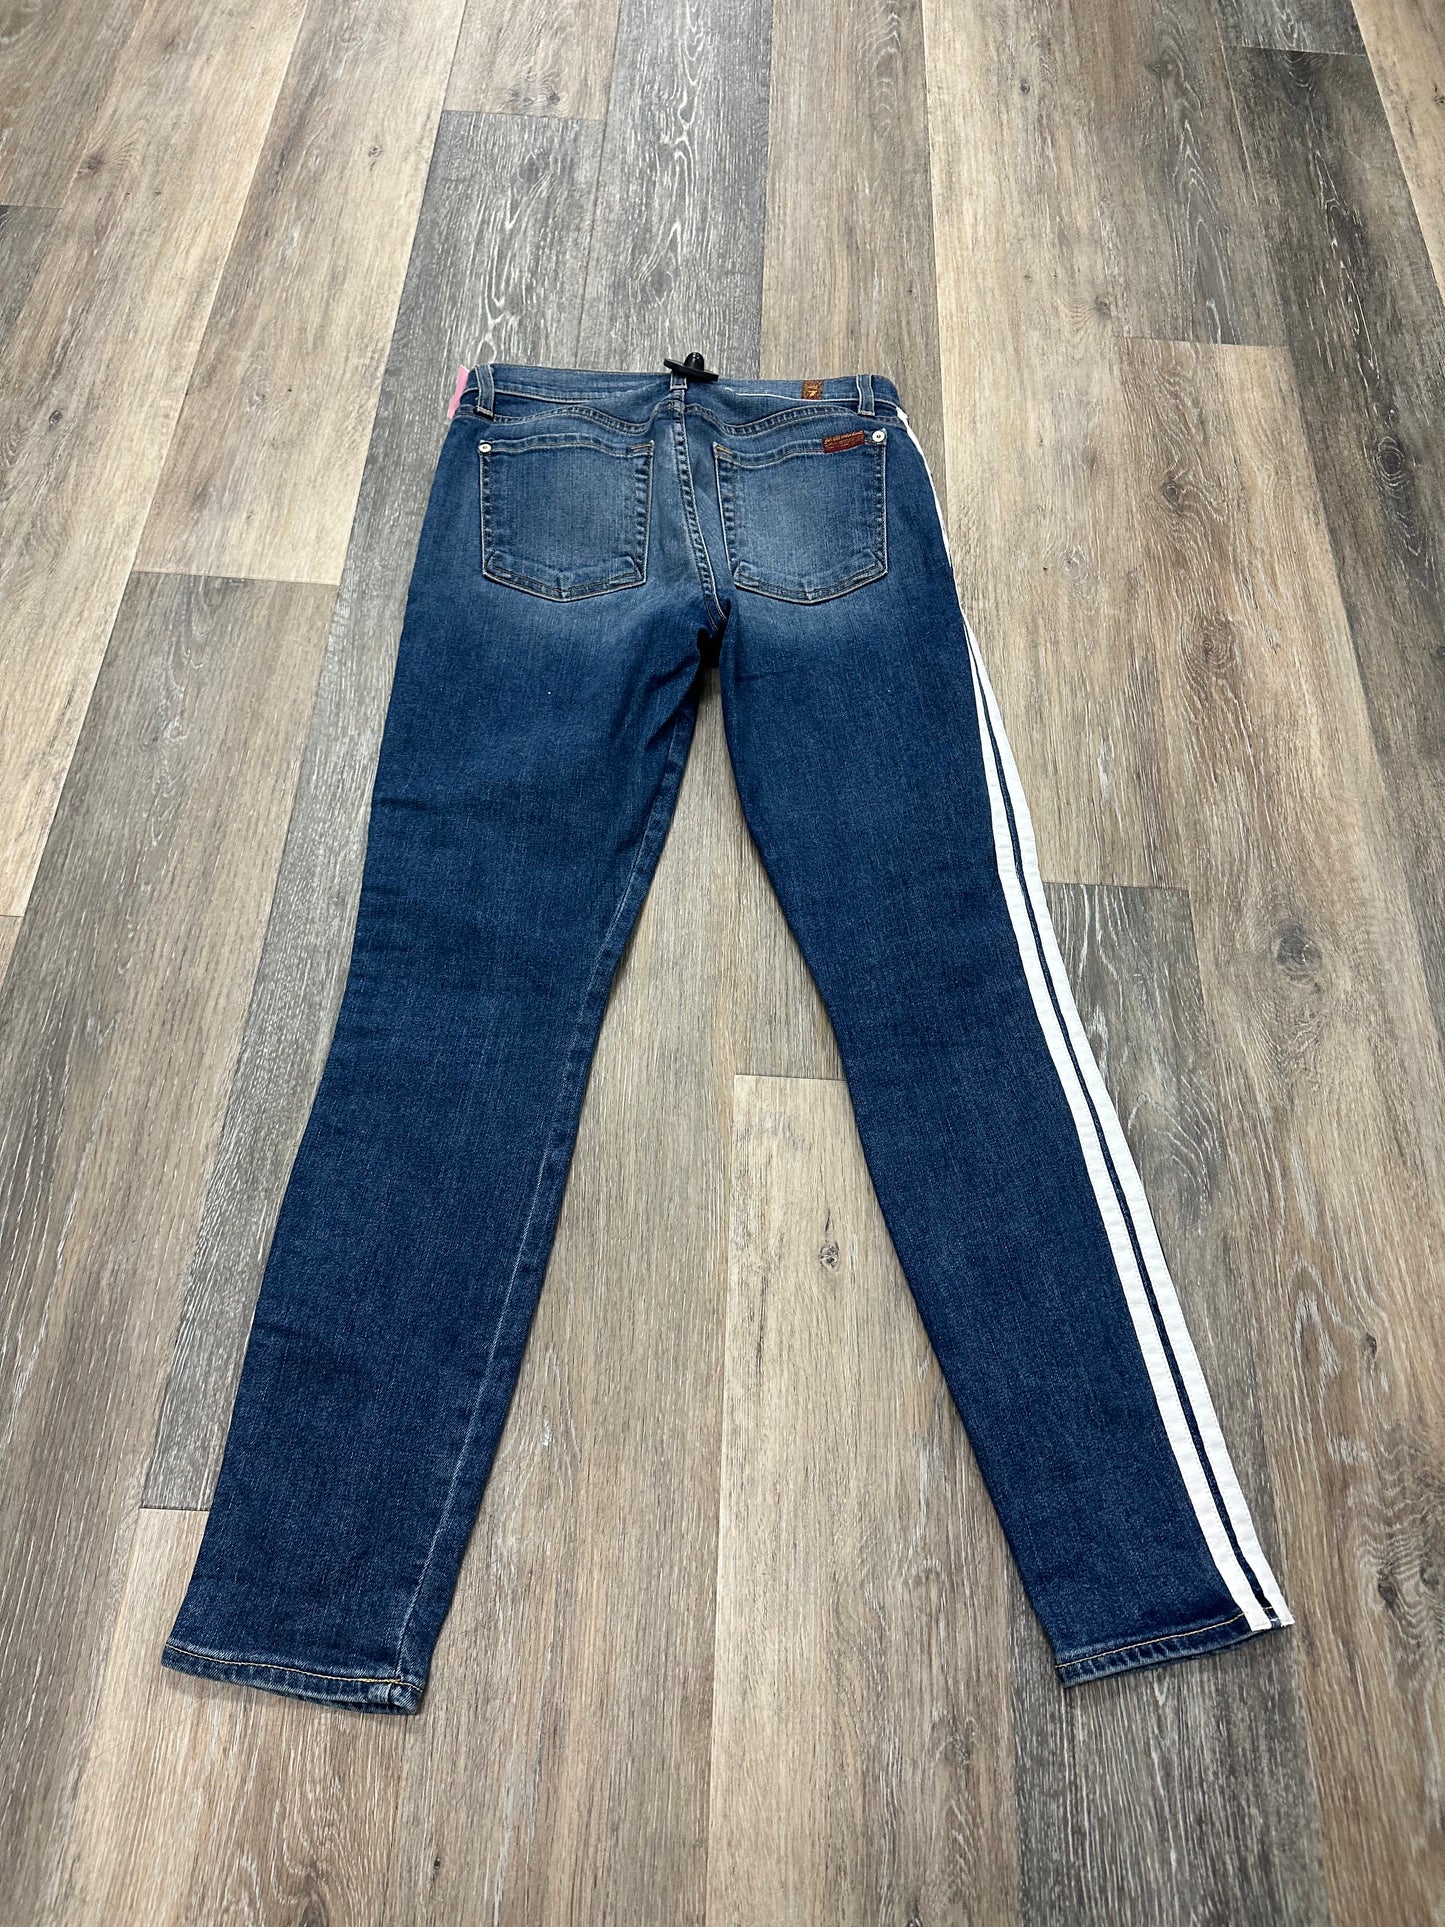 Jeans Designer By 7 For All Mankind  Size: 4/27